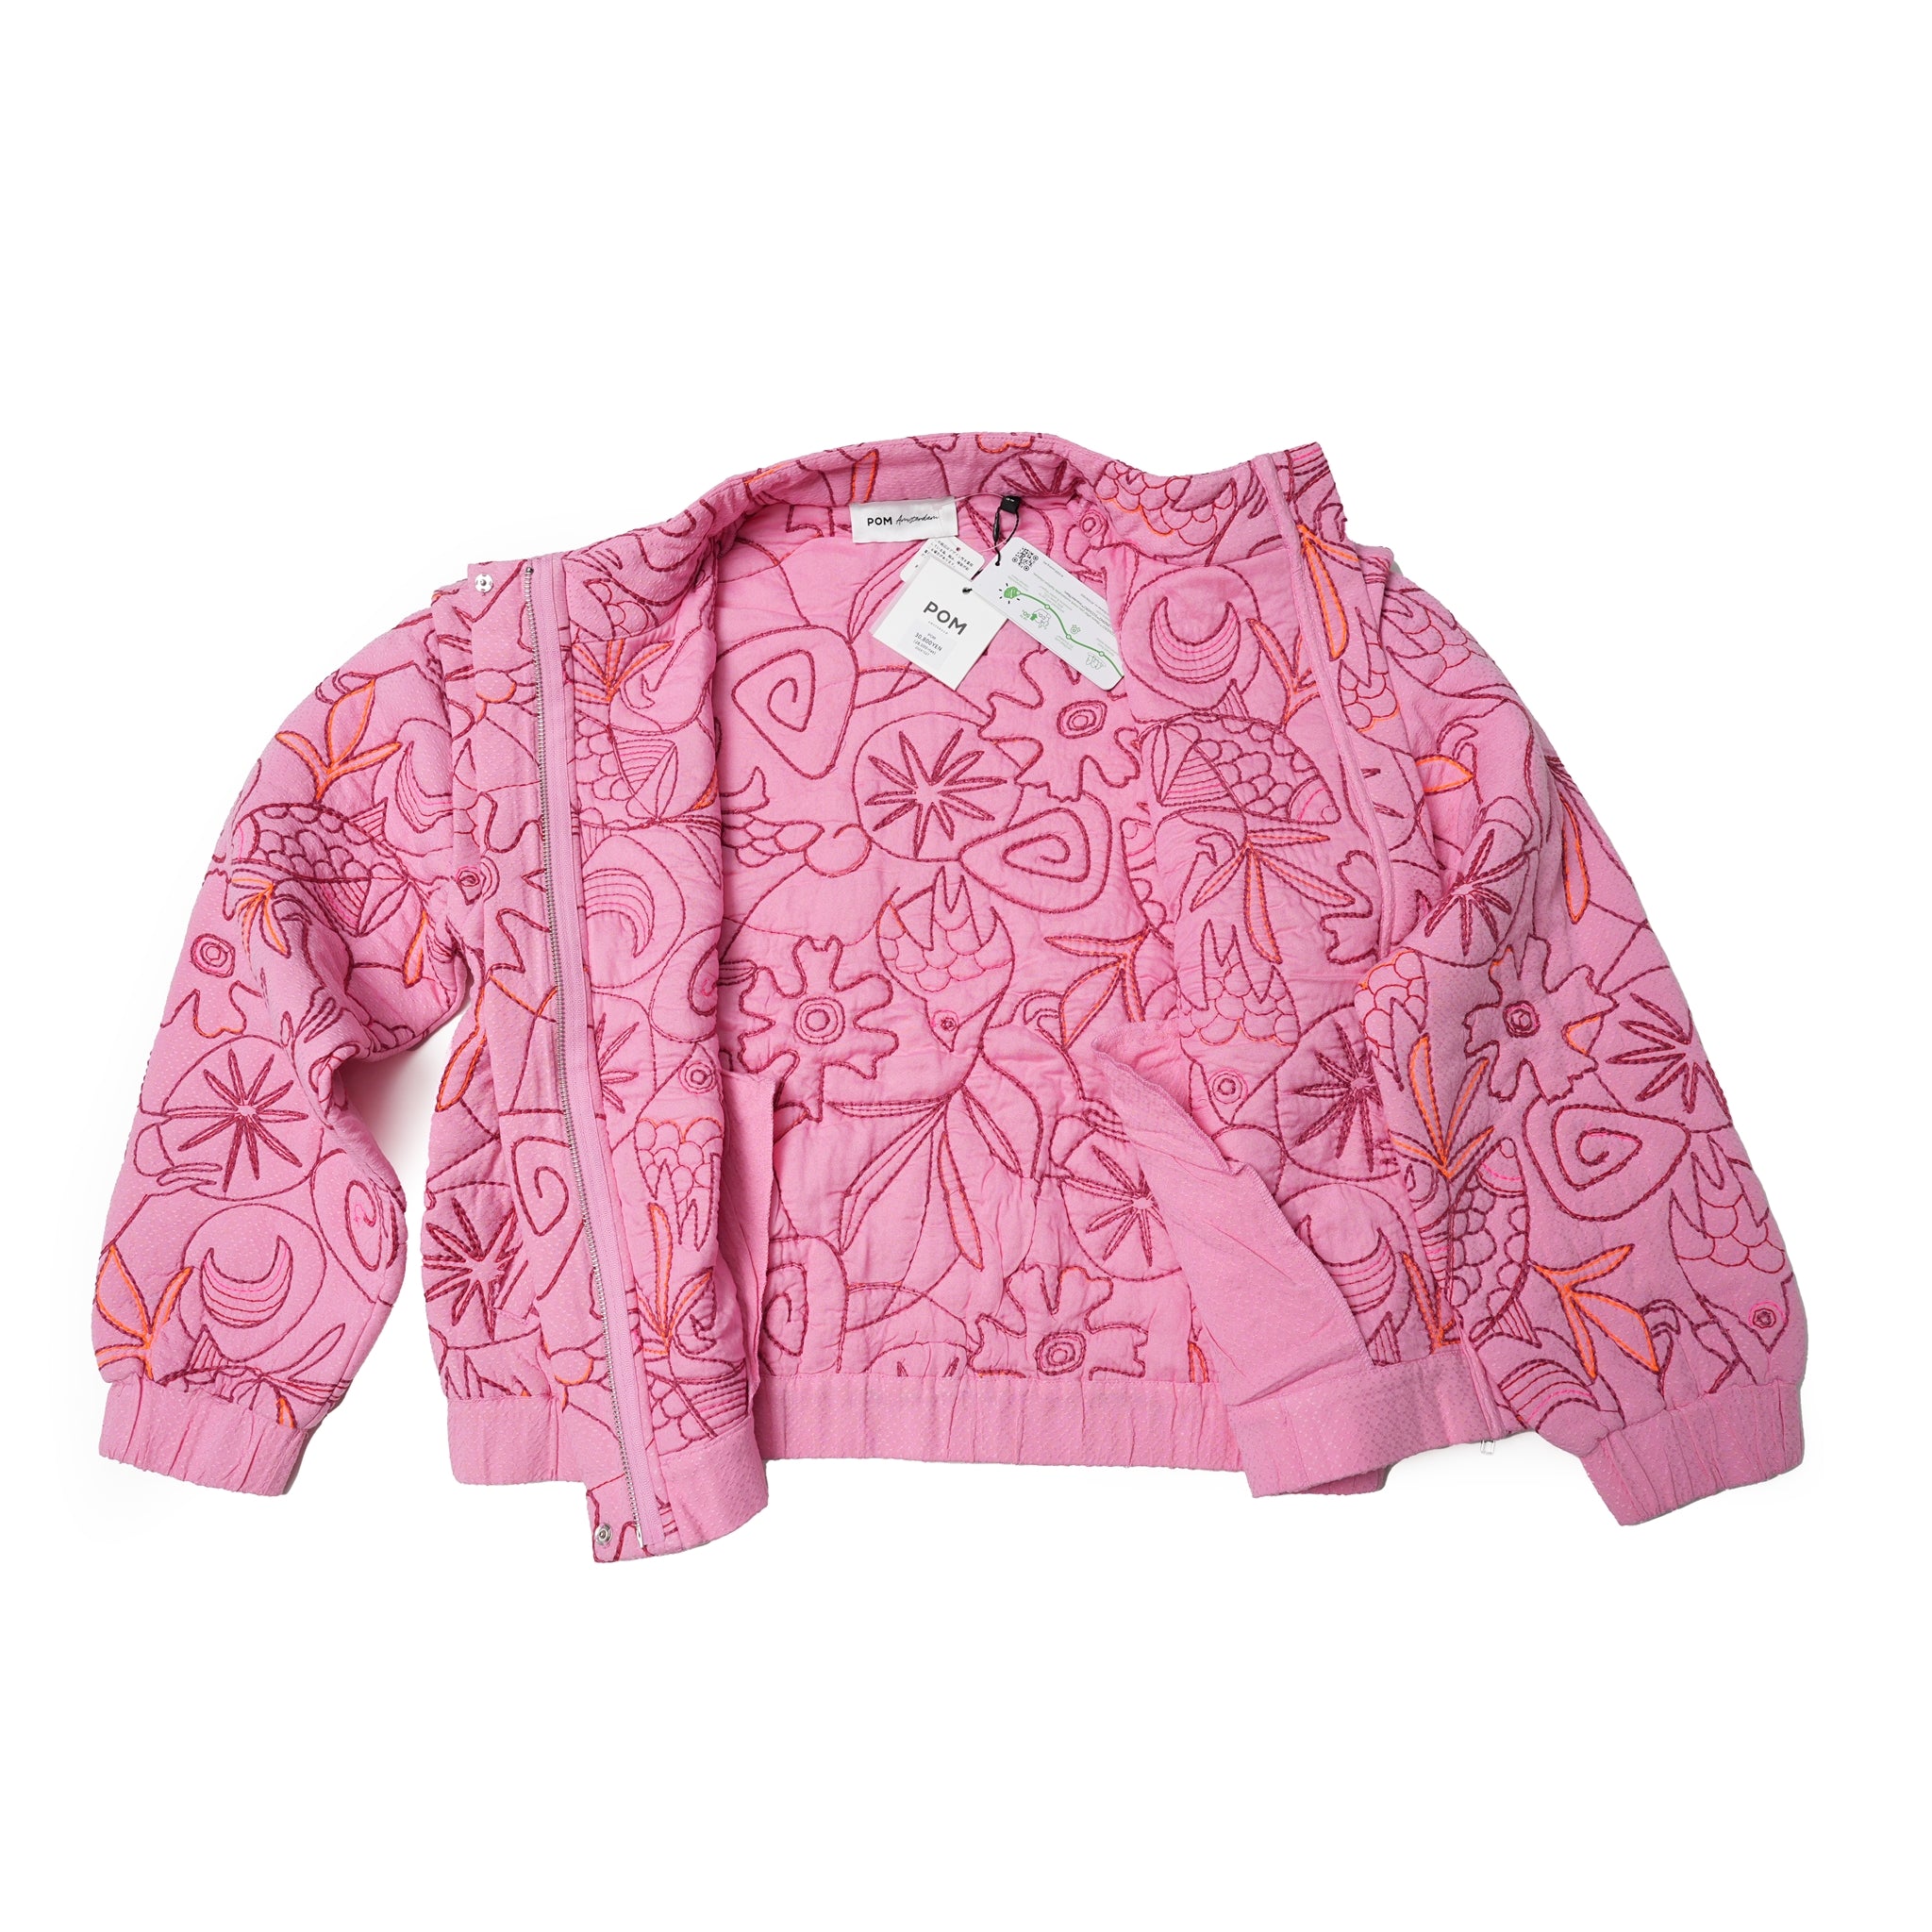 No:SP7383 | Name:JACKET | Color:Dreams French Pink【POM AMSTERDAM_ポムアムステルダム】